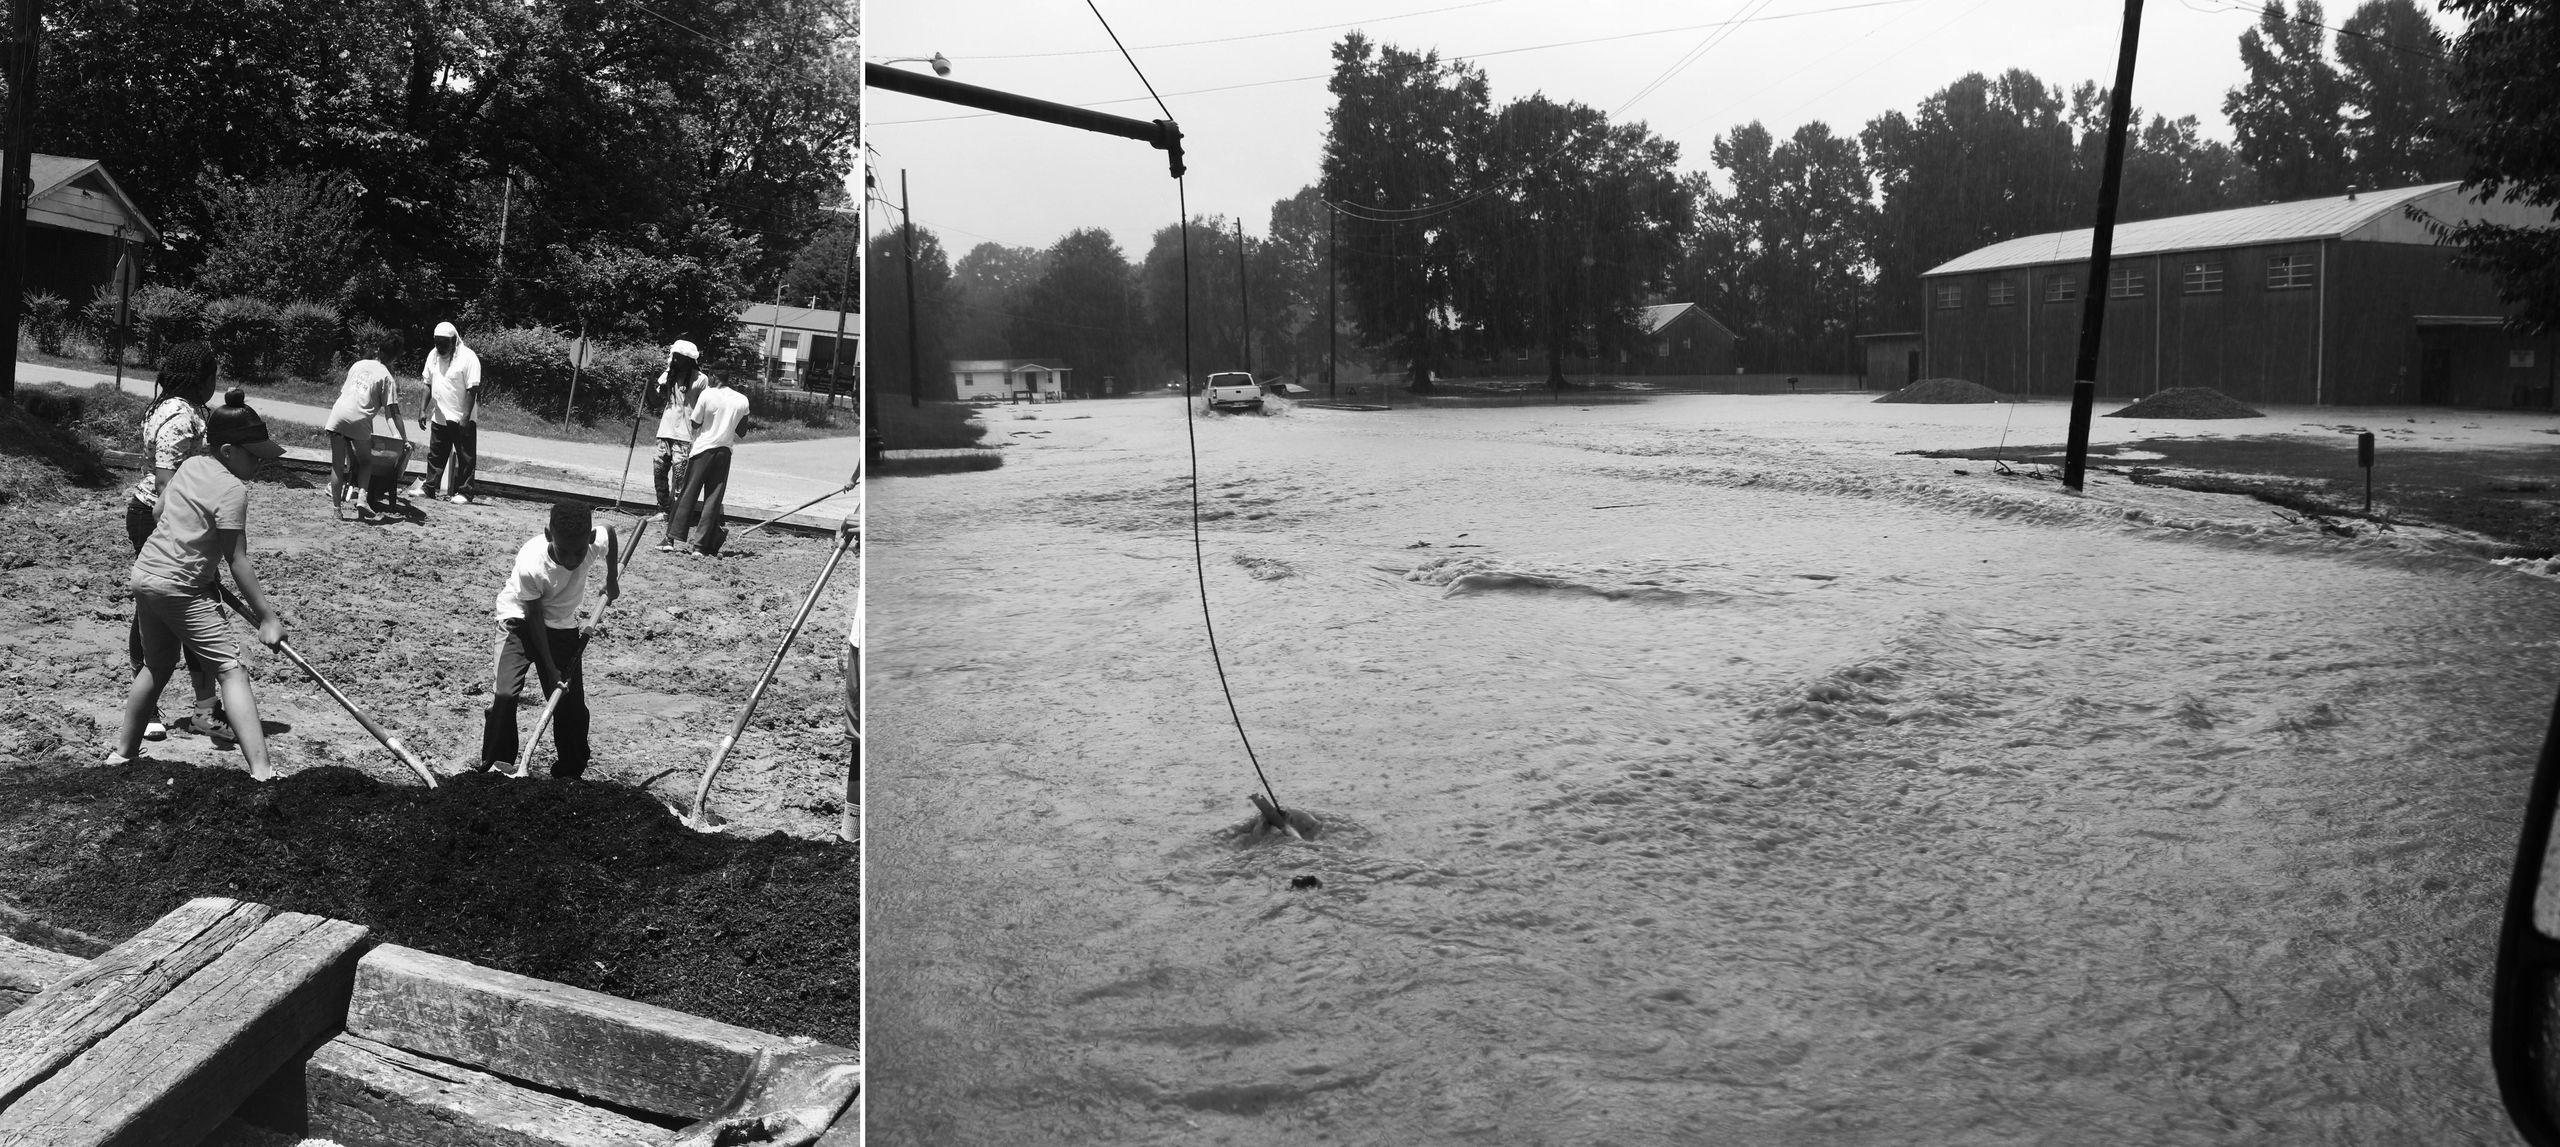 Right: A street in the town looked like after a storm before it had an updated drainage system. Left: Kids in Creek Rangers h